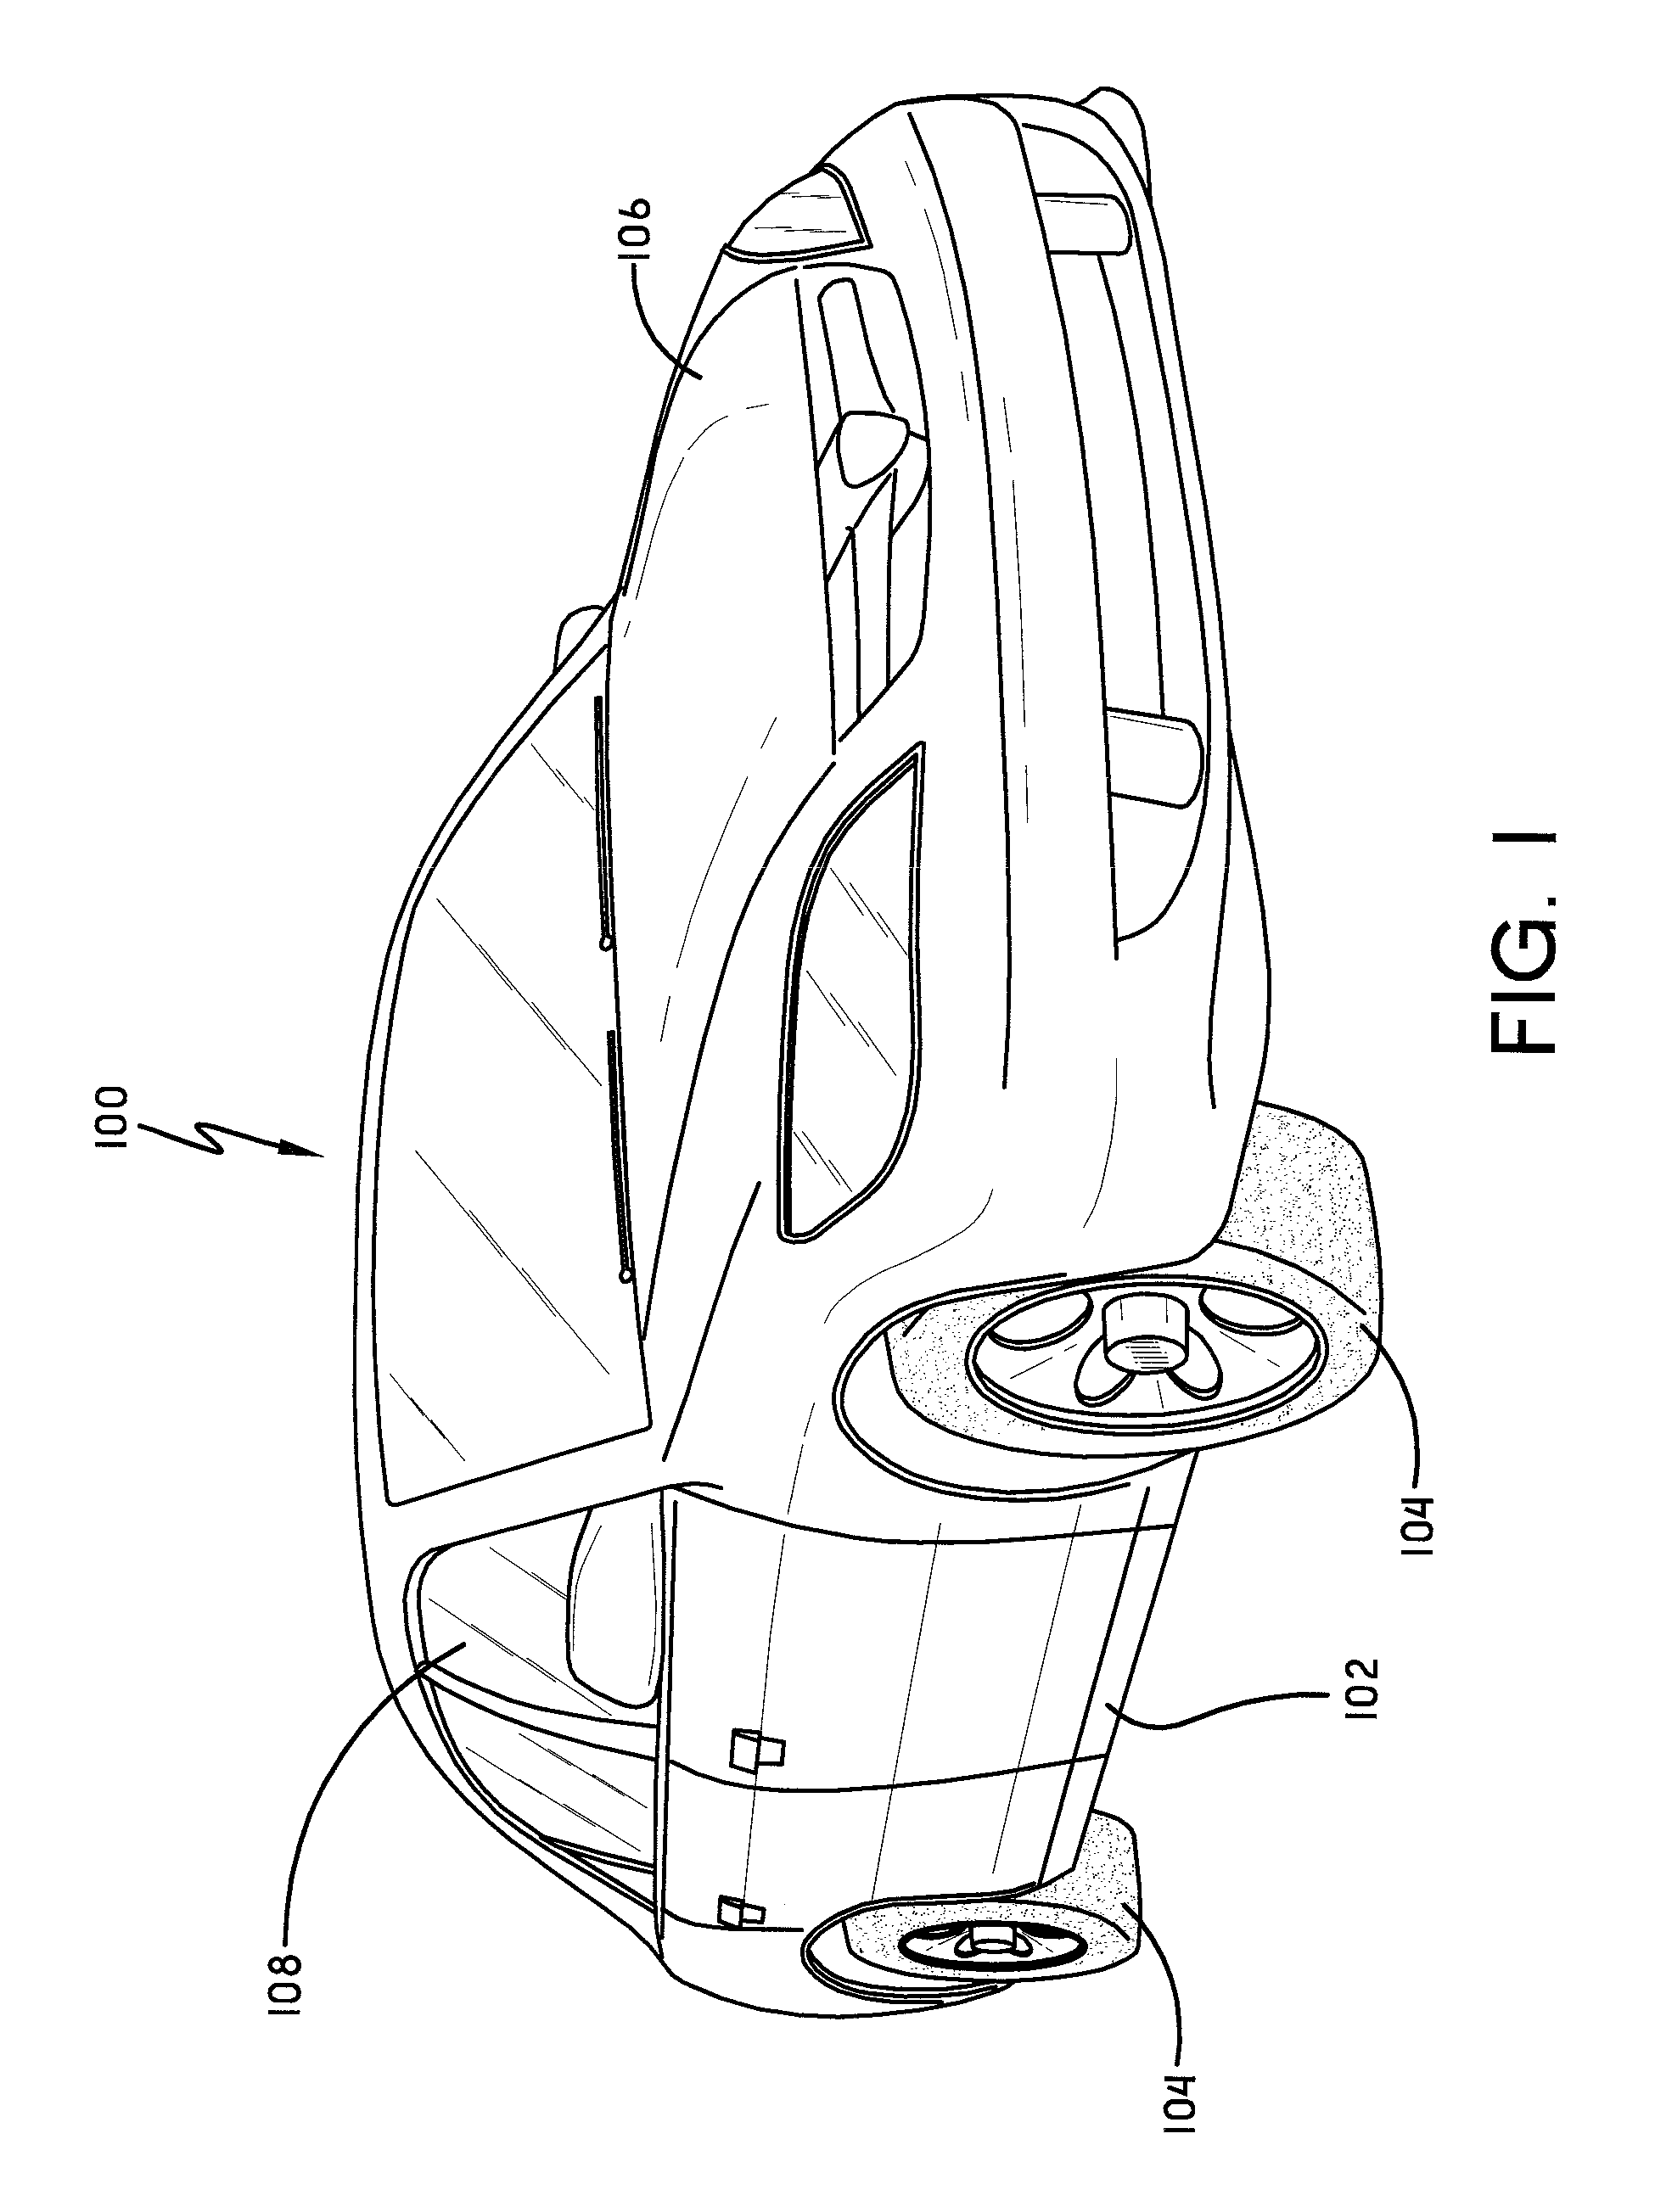 Friction controlled ball joint